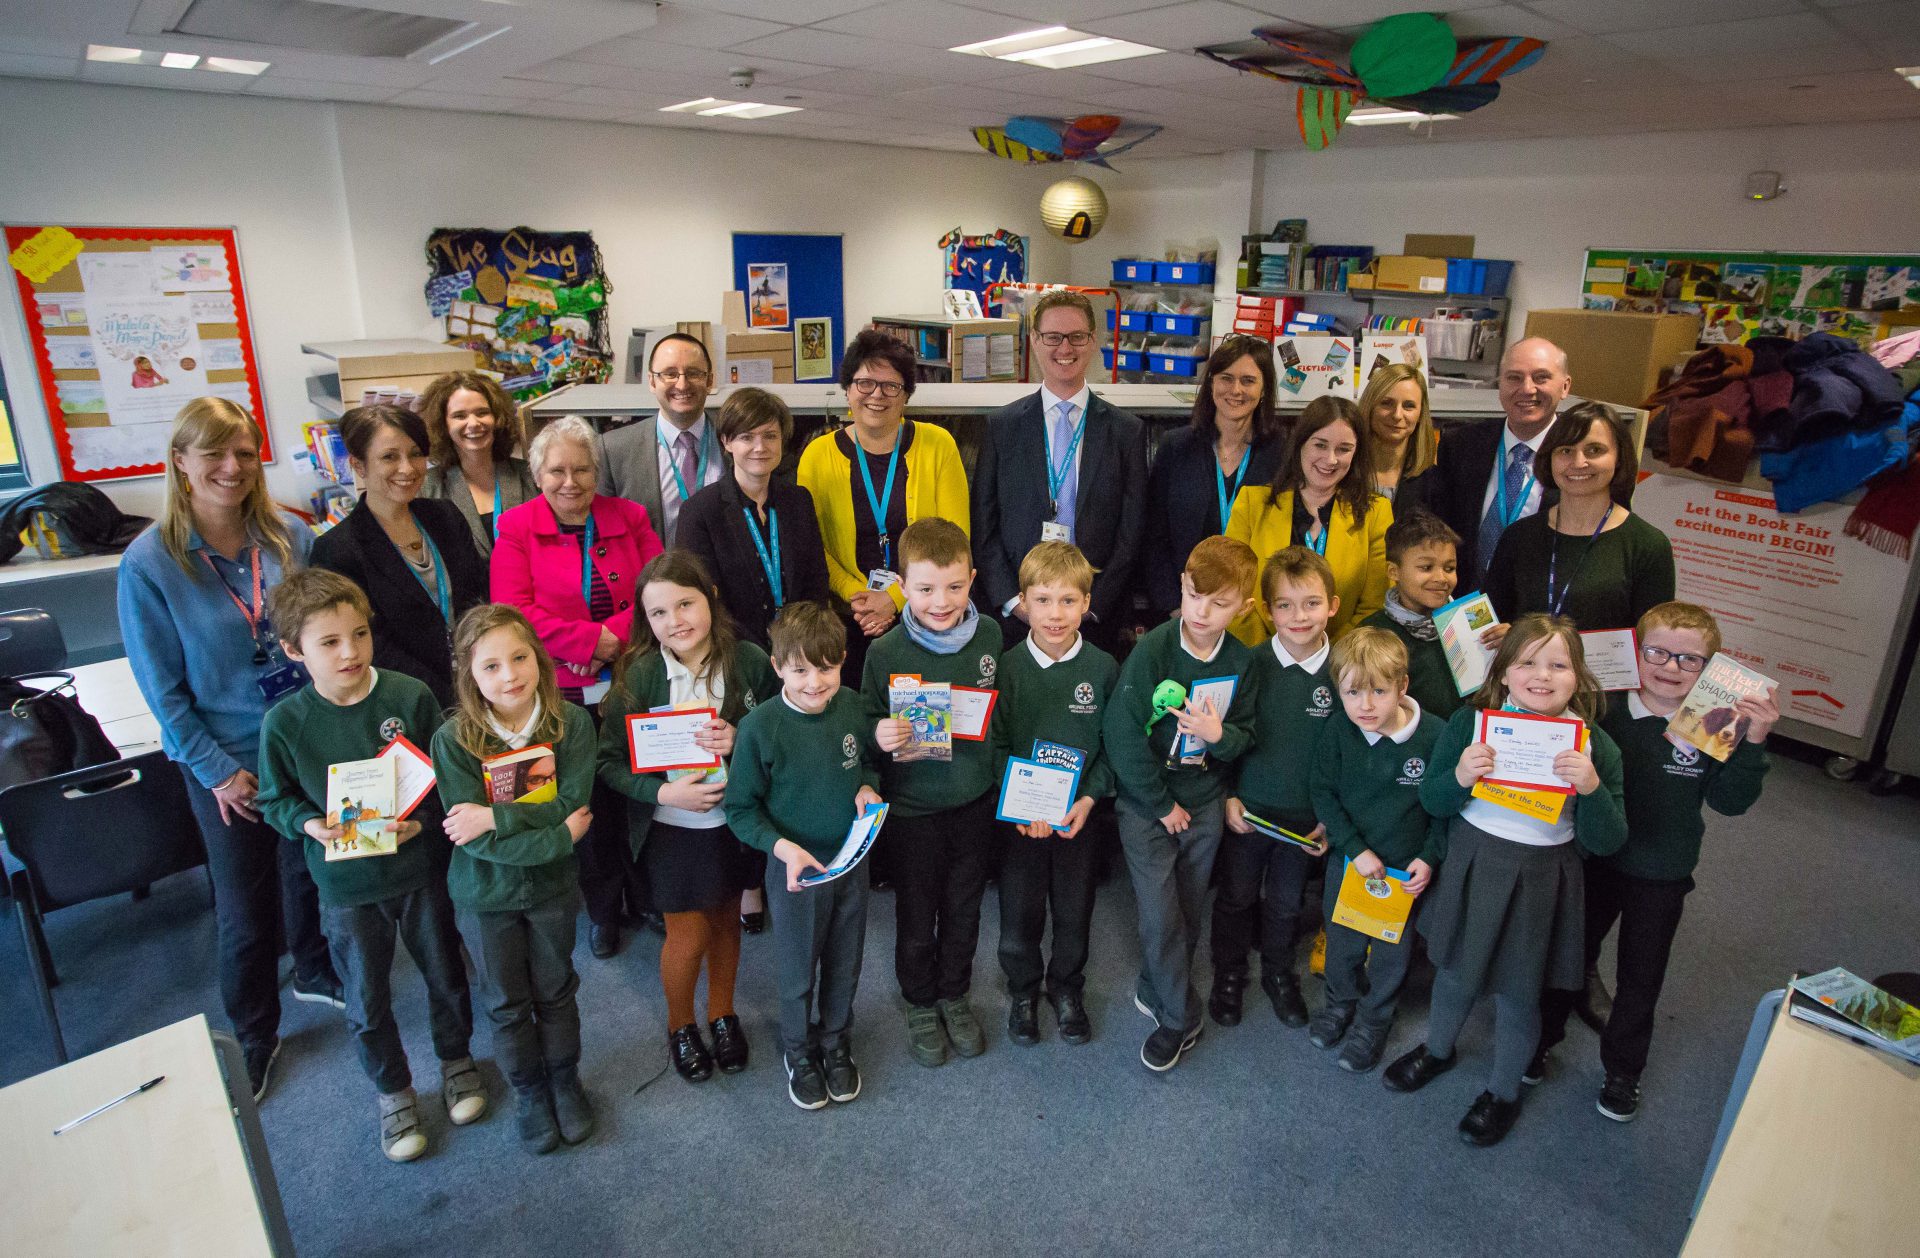 Students and teachers of Brunel Field Primary School, Bristol holding books